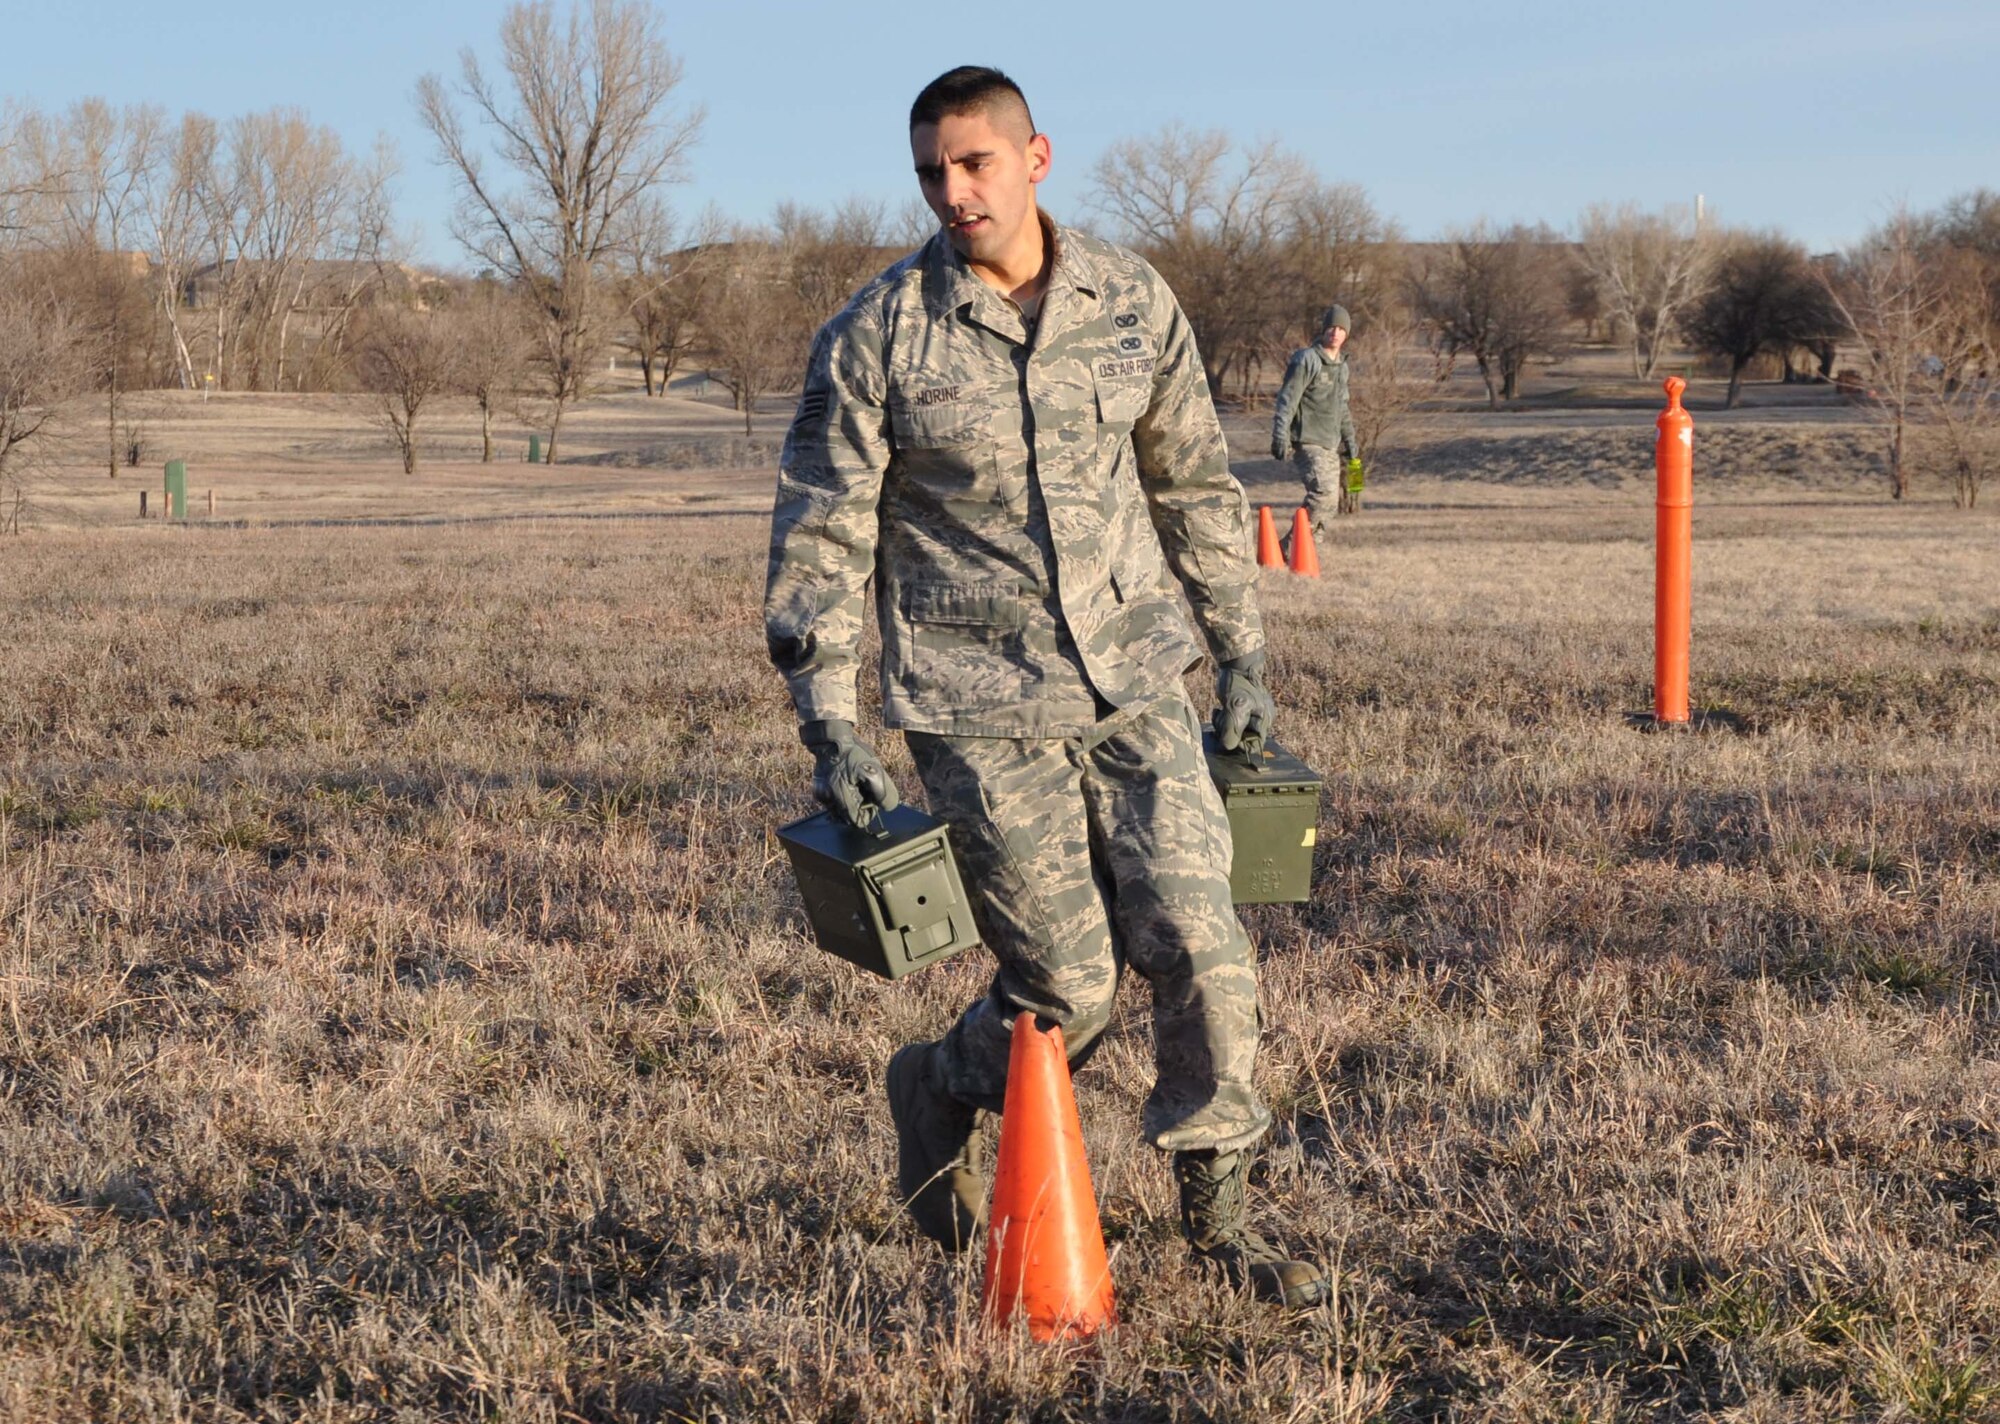 Staff Sgt. Nick Horine, 931st Security Forces Squadron, sprints while carrying ammo cans as part of a combat fitness course conducted by the squadron, Jan. 7, 2012.  The course was part of a two-day combat training regimen the squadron performed over the January unit training assembly, which included martial arts and ground fighting skills training as well.  (U.S. Air Force photo by 1st Lt. Zach Anderson)